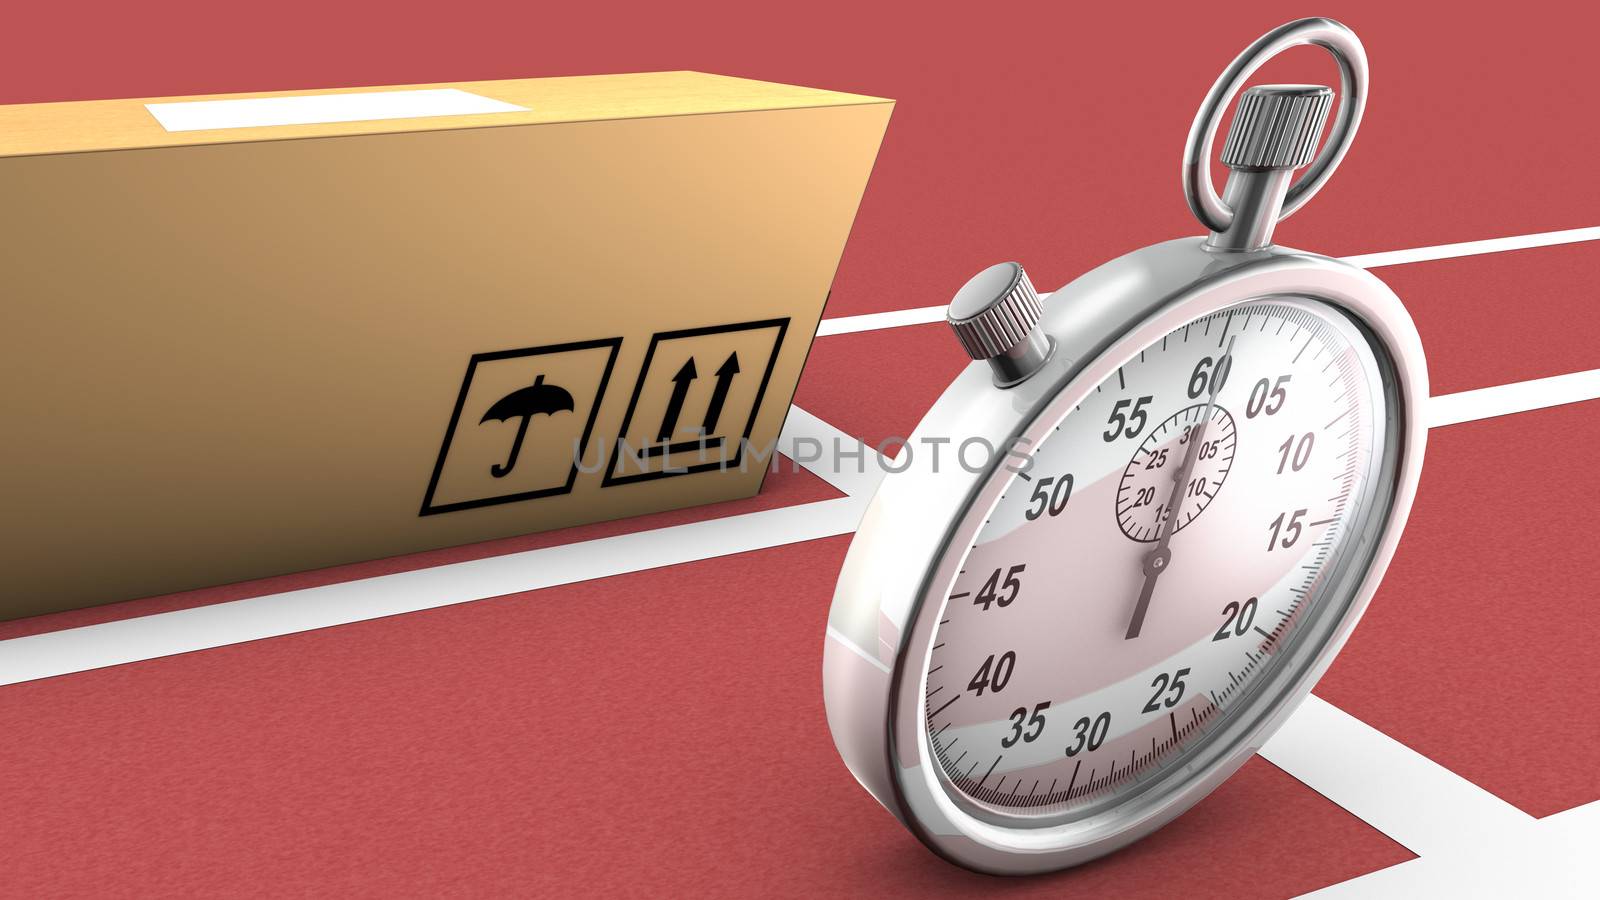 This illustration shows a box and a stopwatch ready to start a race. The concept is that the package can be as fast and accurate as the stopwatch in order to be transported and delivered on time.